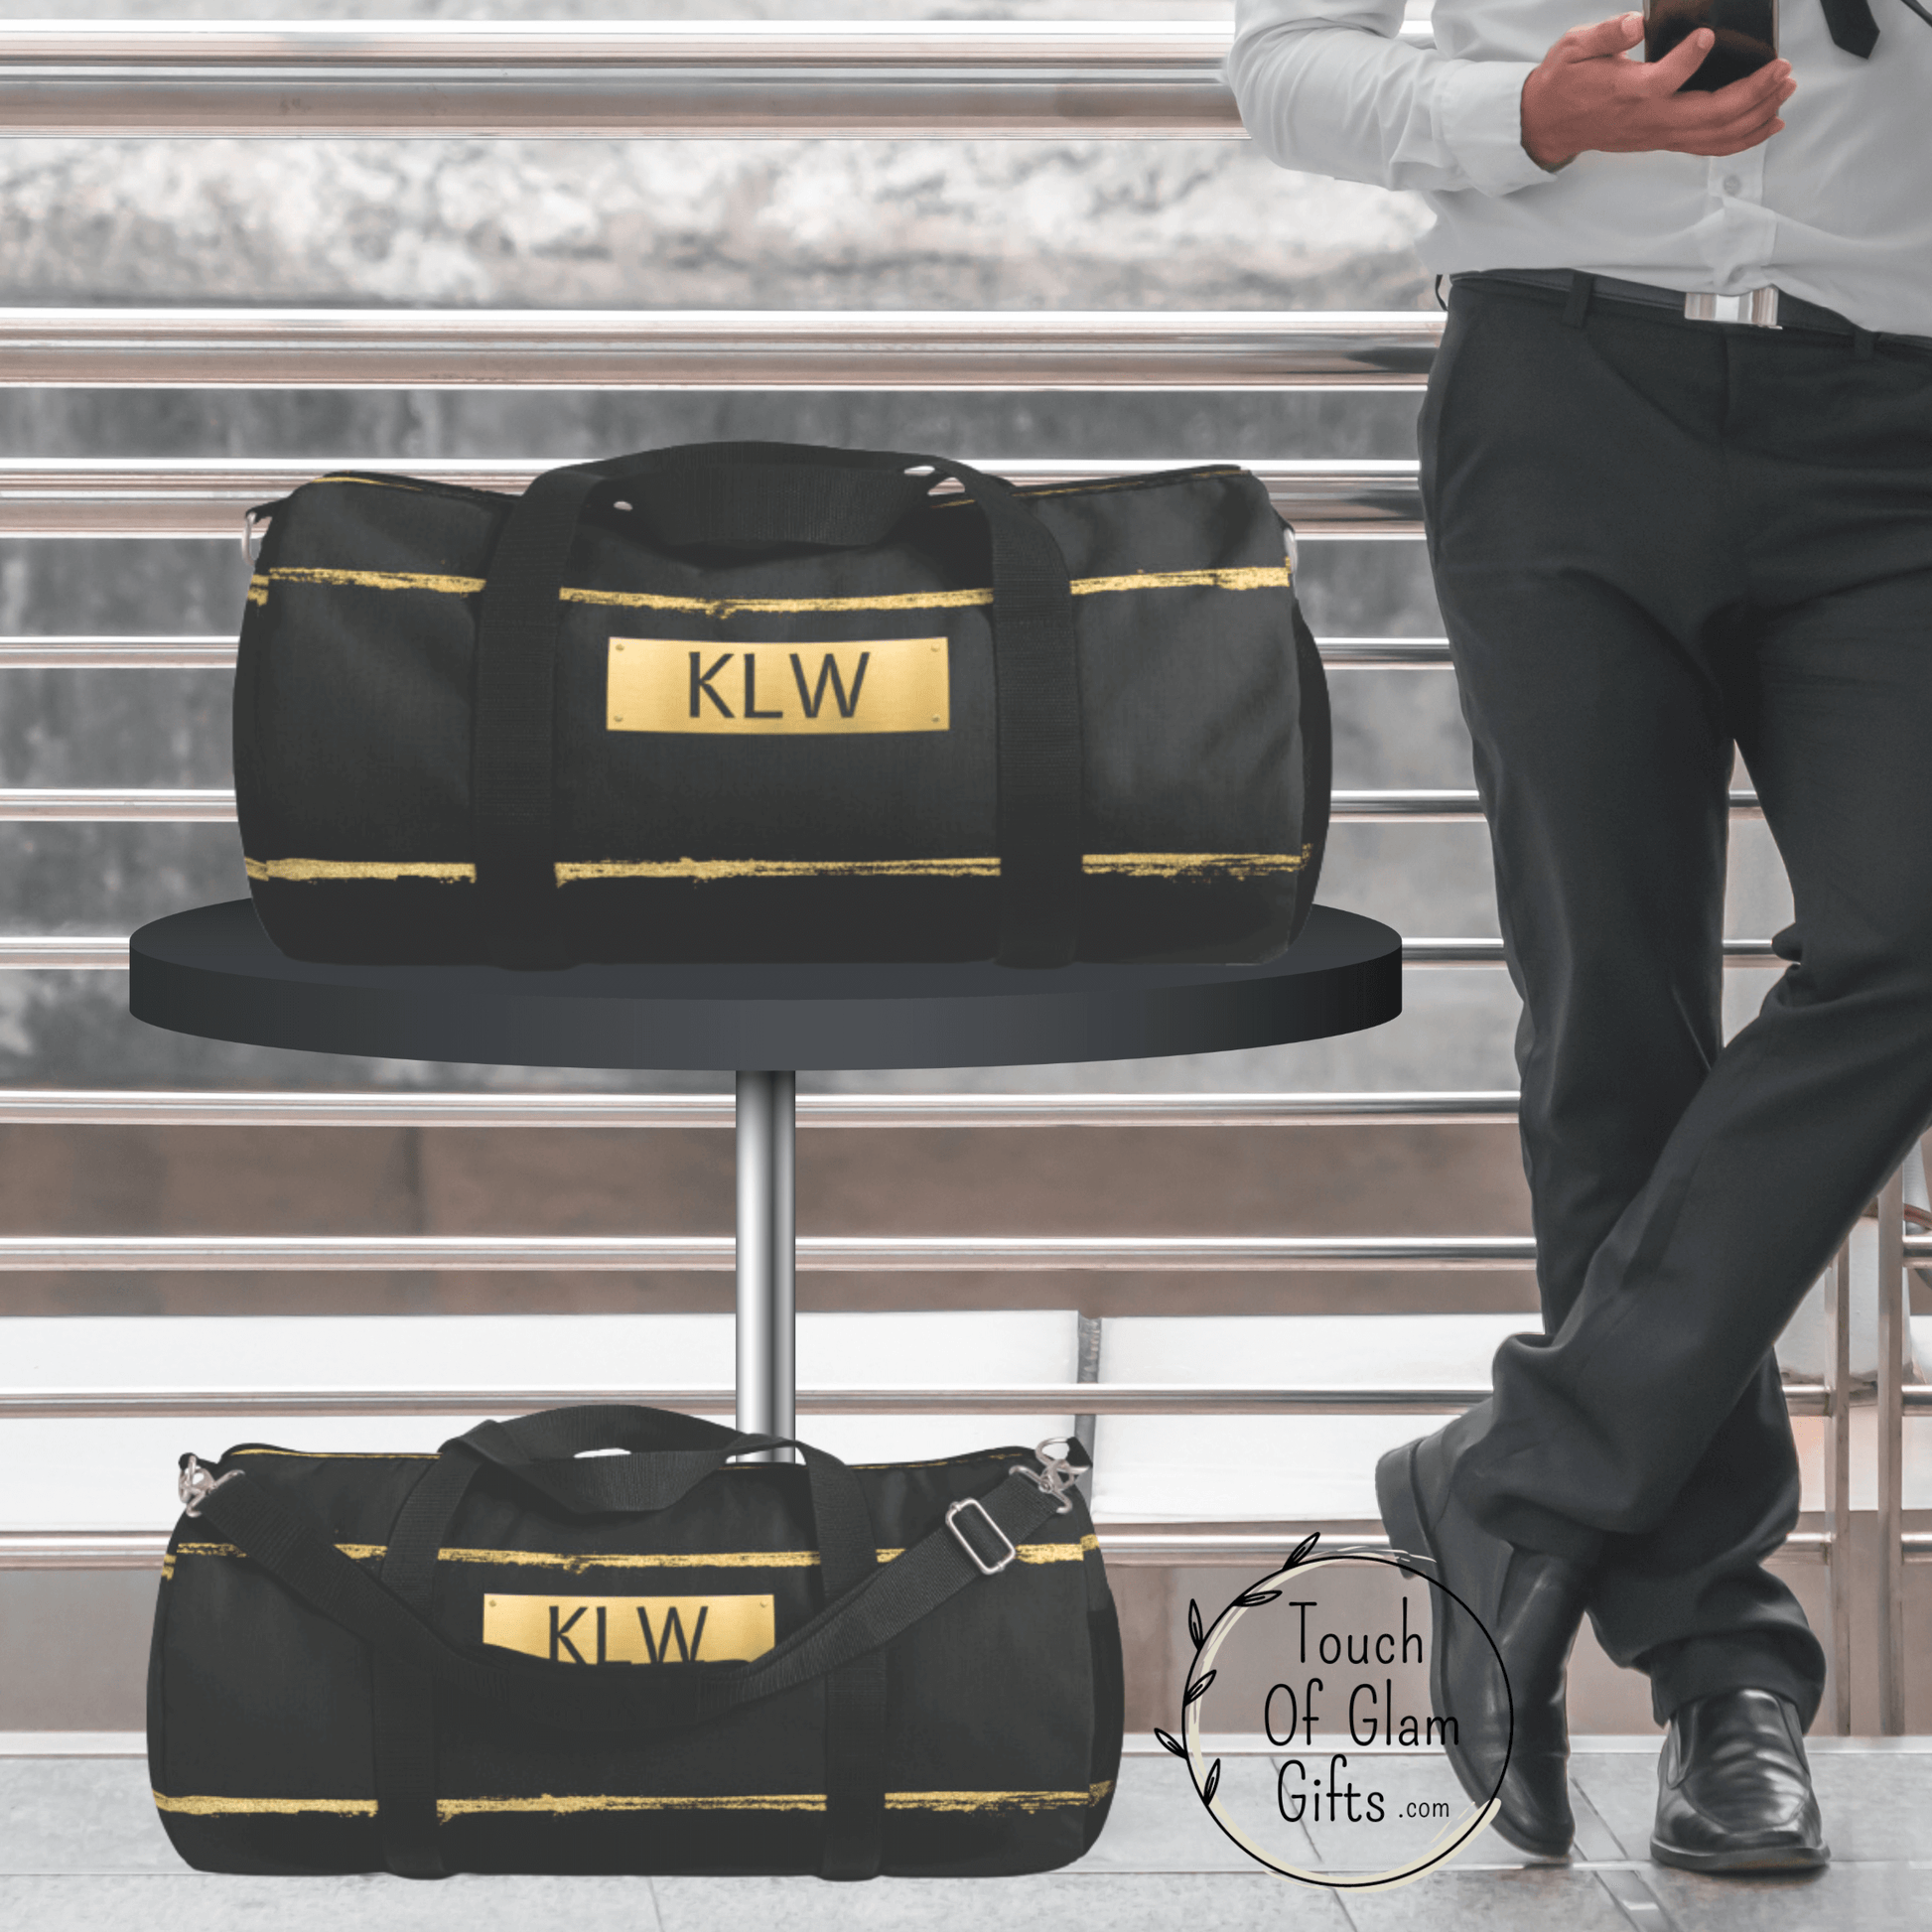 Mens Monogrammed canvas duffel bag is the perfect travel accessory for men. This light black or charcoal grey bag has a gold plate with black initials to personalize the bag.